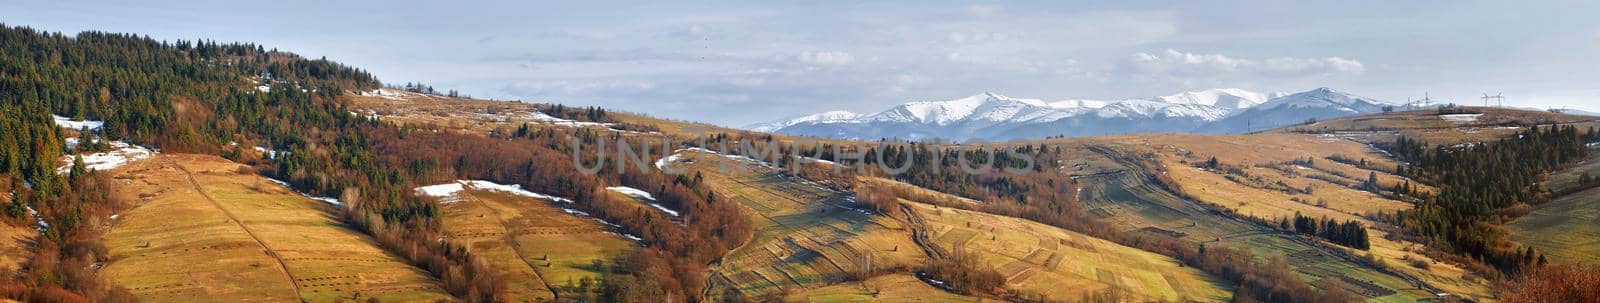 Beauty of nature. Panorama of snow-capped peaks of Carpathian Mountains, Ukraine, Europe. 